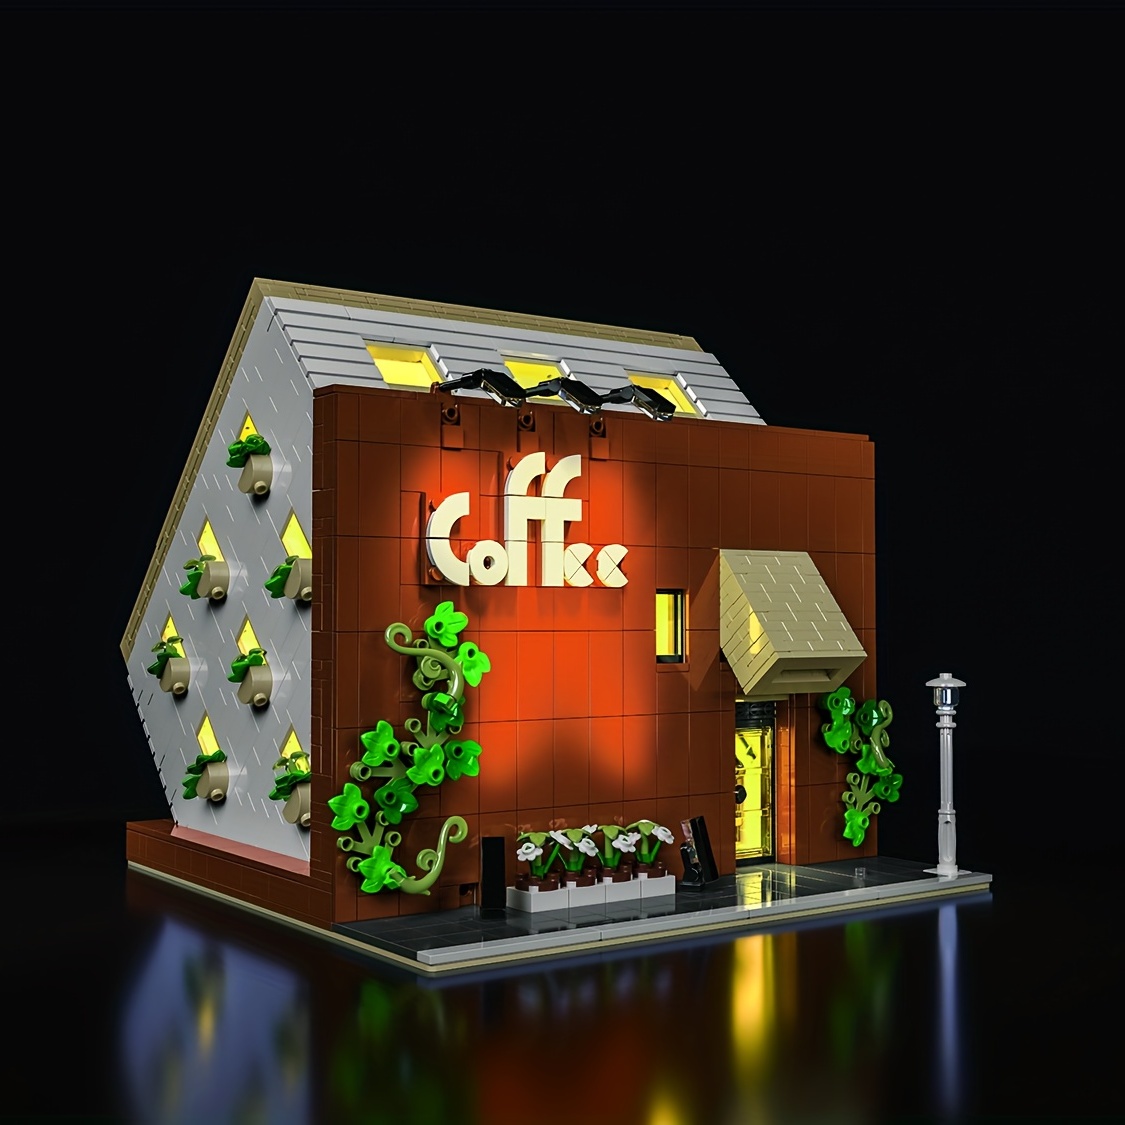 City Cafe Architecture Building Kit with LED Lights,3 Levels City Cafe  Model Building Blocks Toy,for 12+Age Teen,Adult（1443 Pieces）